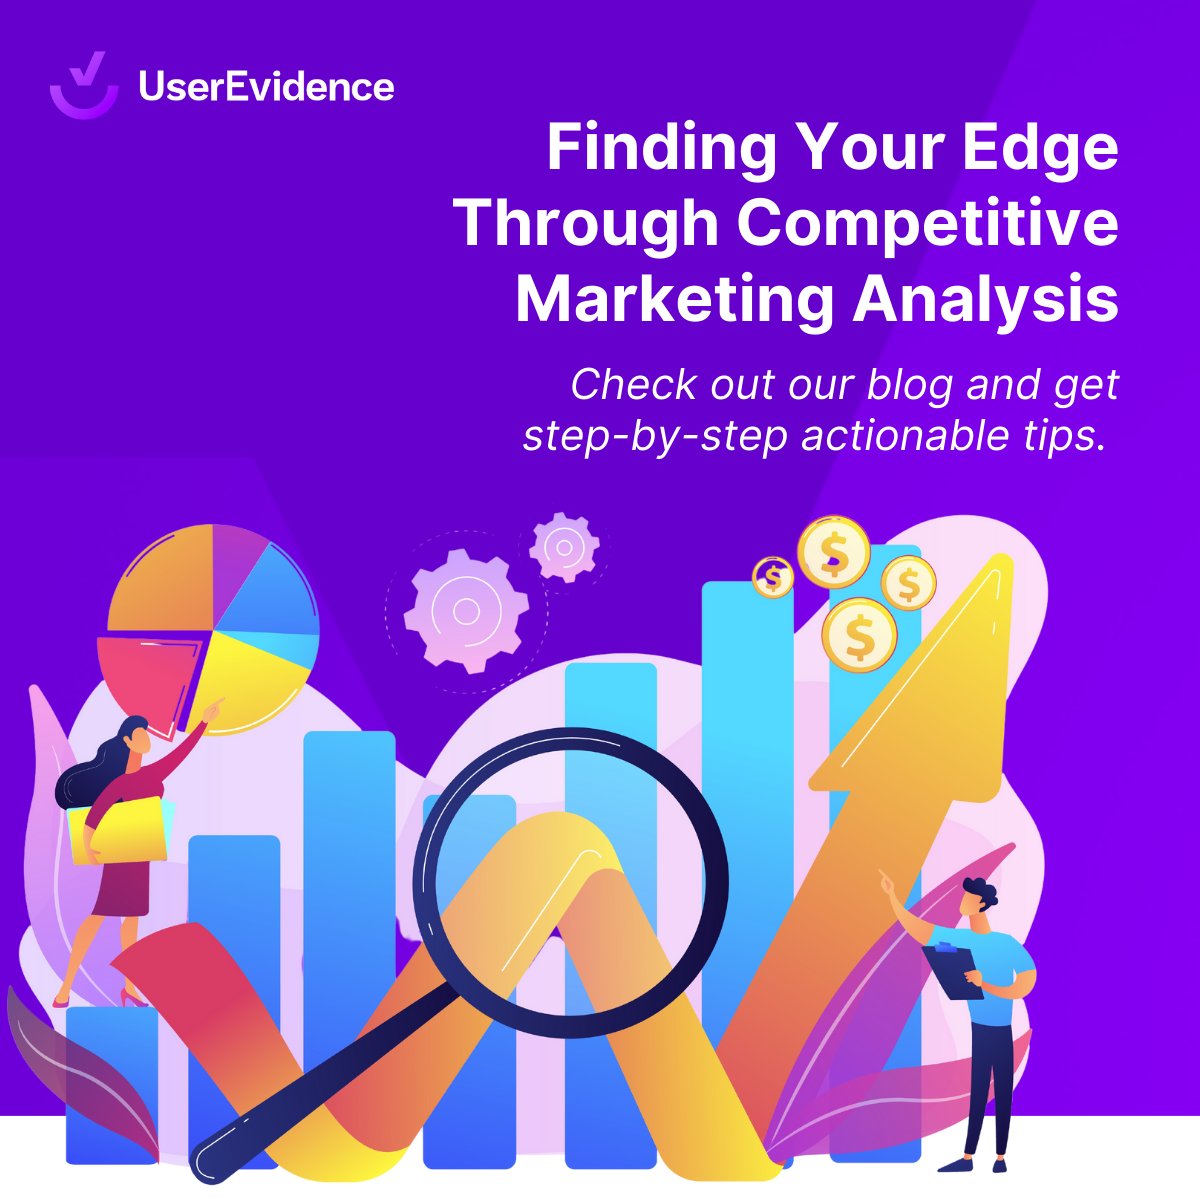 The cornerstone of #competitivemarketing analysis is…

Identifying your DIRECT #competitors. 

Duh, right? 😆 But you need to dig deeper than what’s on the surface. 

Check out our blog to get step-by-step actionable insights. Read it here blog.userevidence.com/finding-your-e…